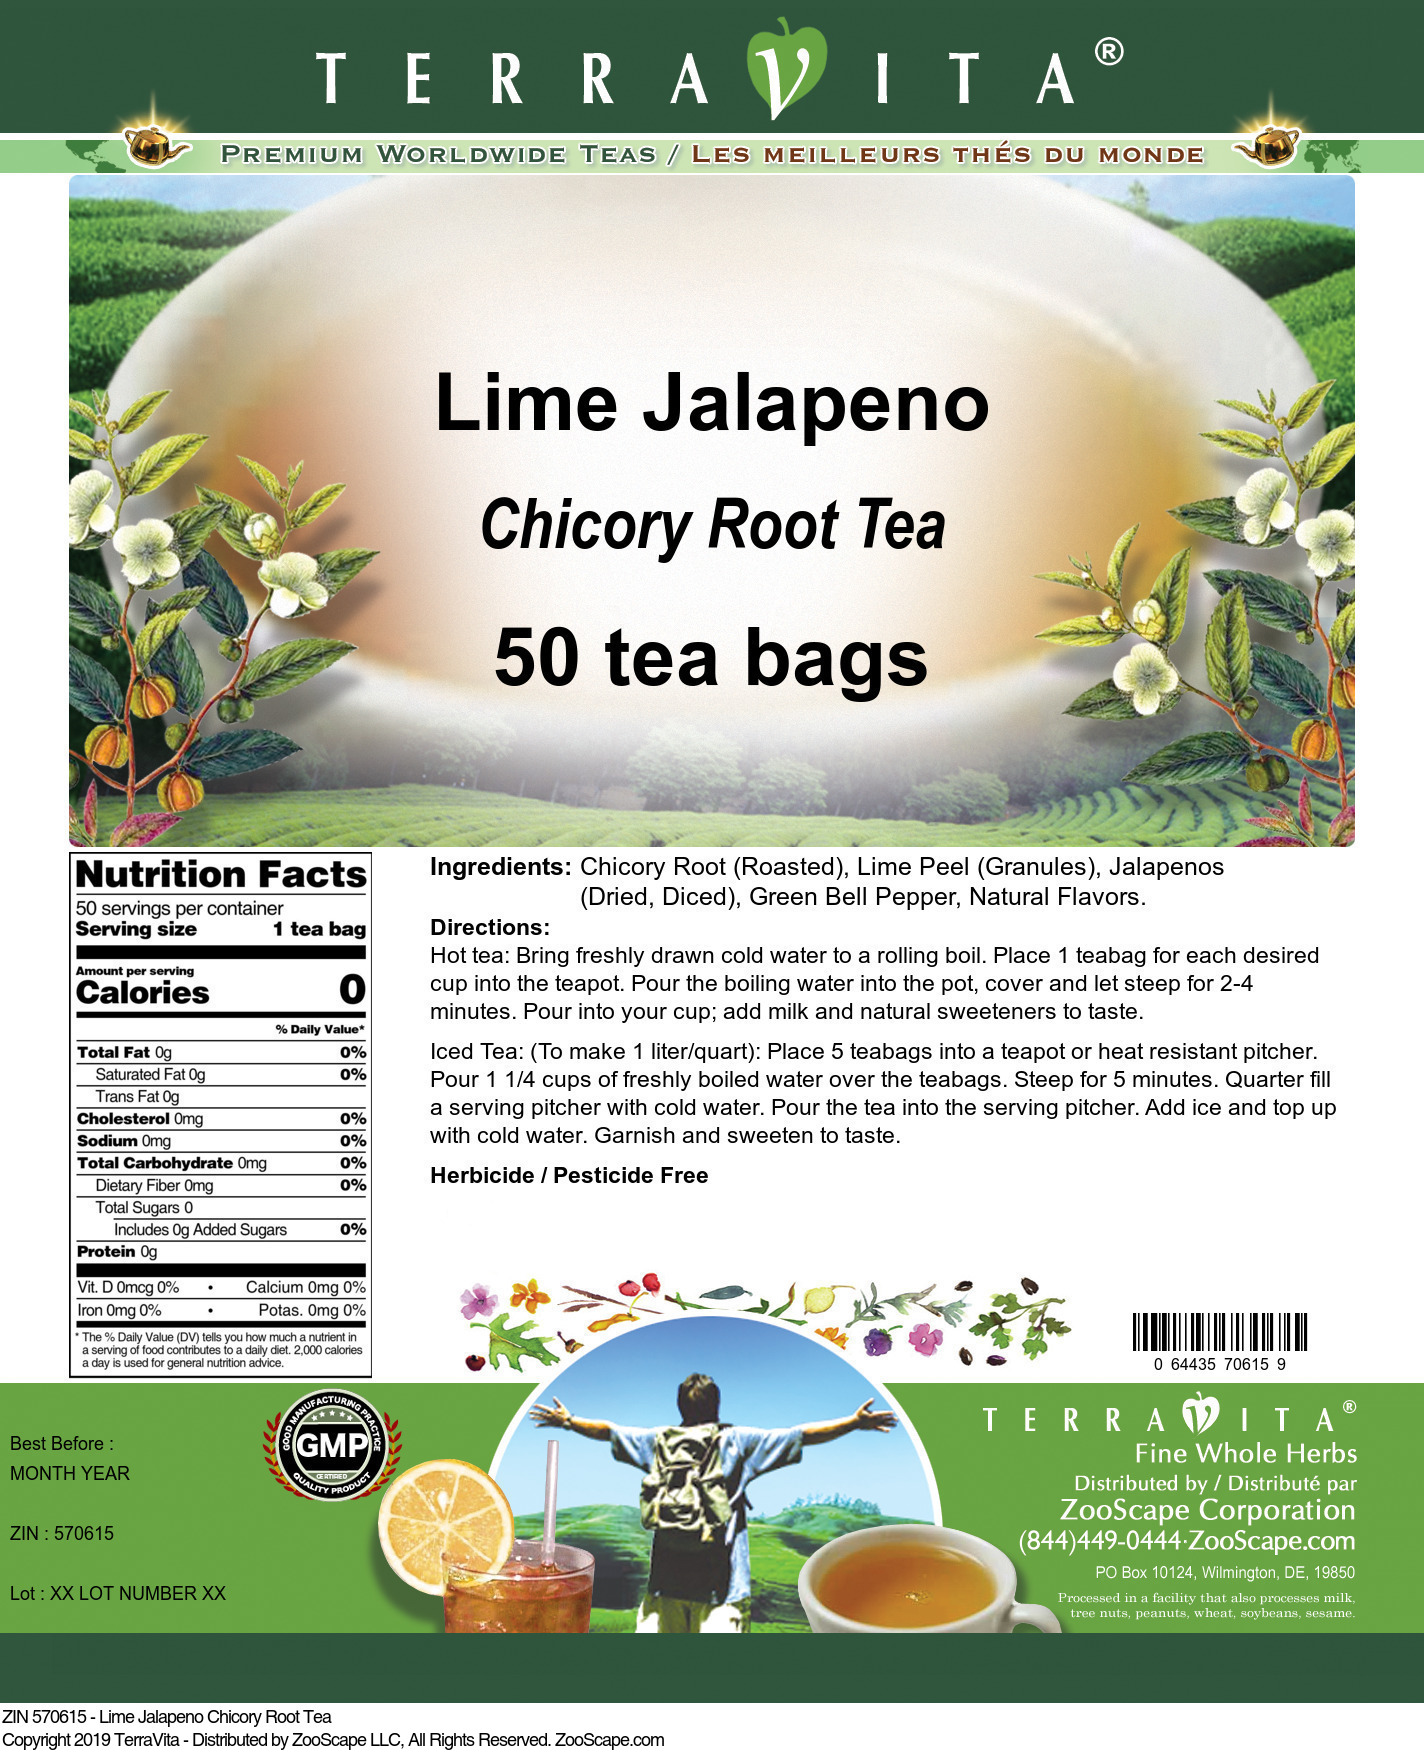 Lime Jalapeno Chicory Root Tea - Label